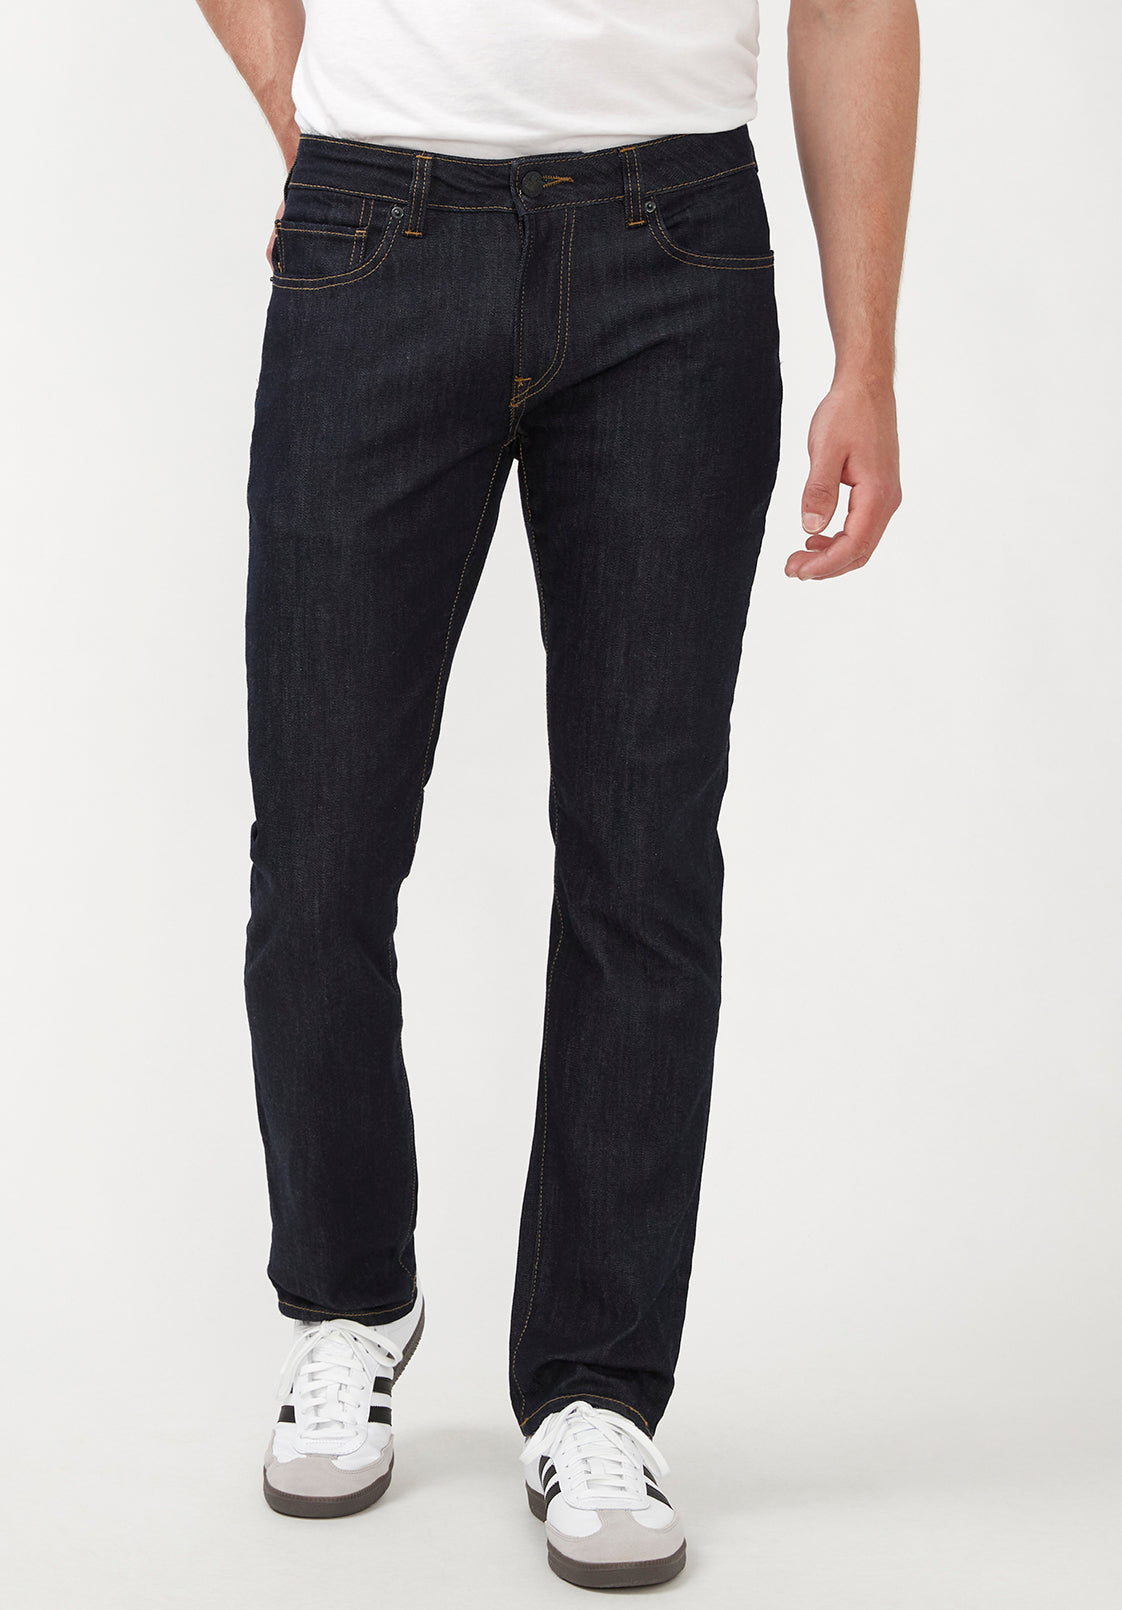 Relaxed Straight Driven Men's Jeans in Black Wash - BM22746